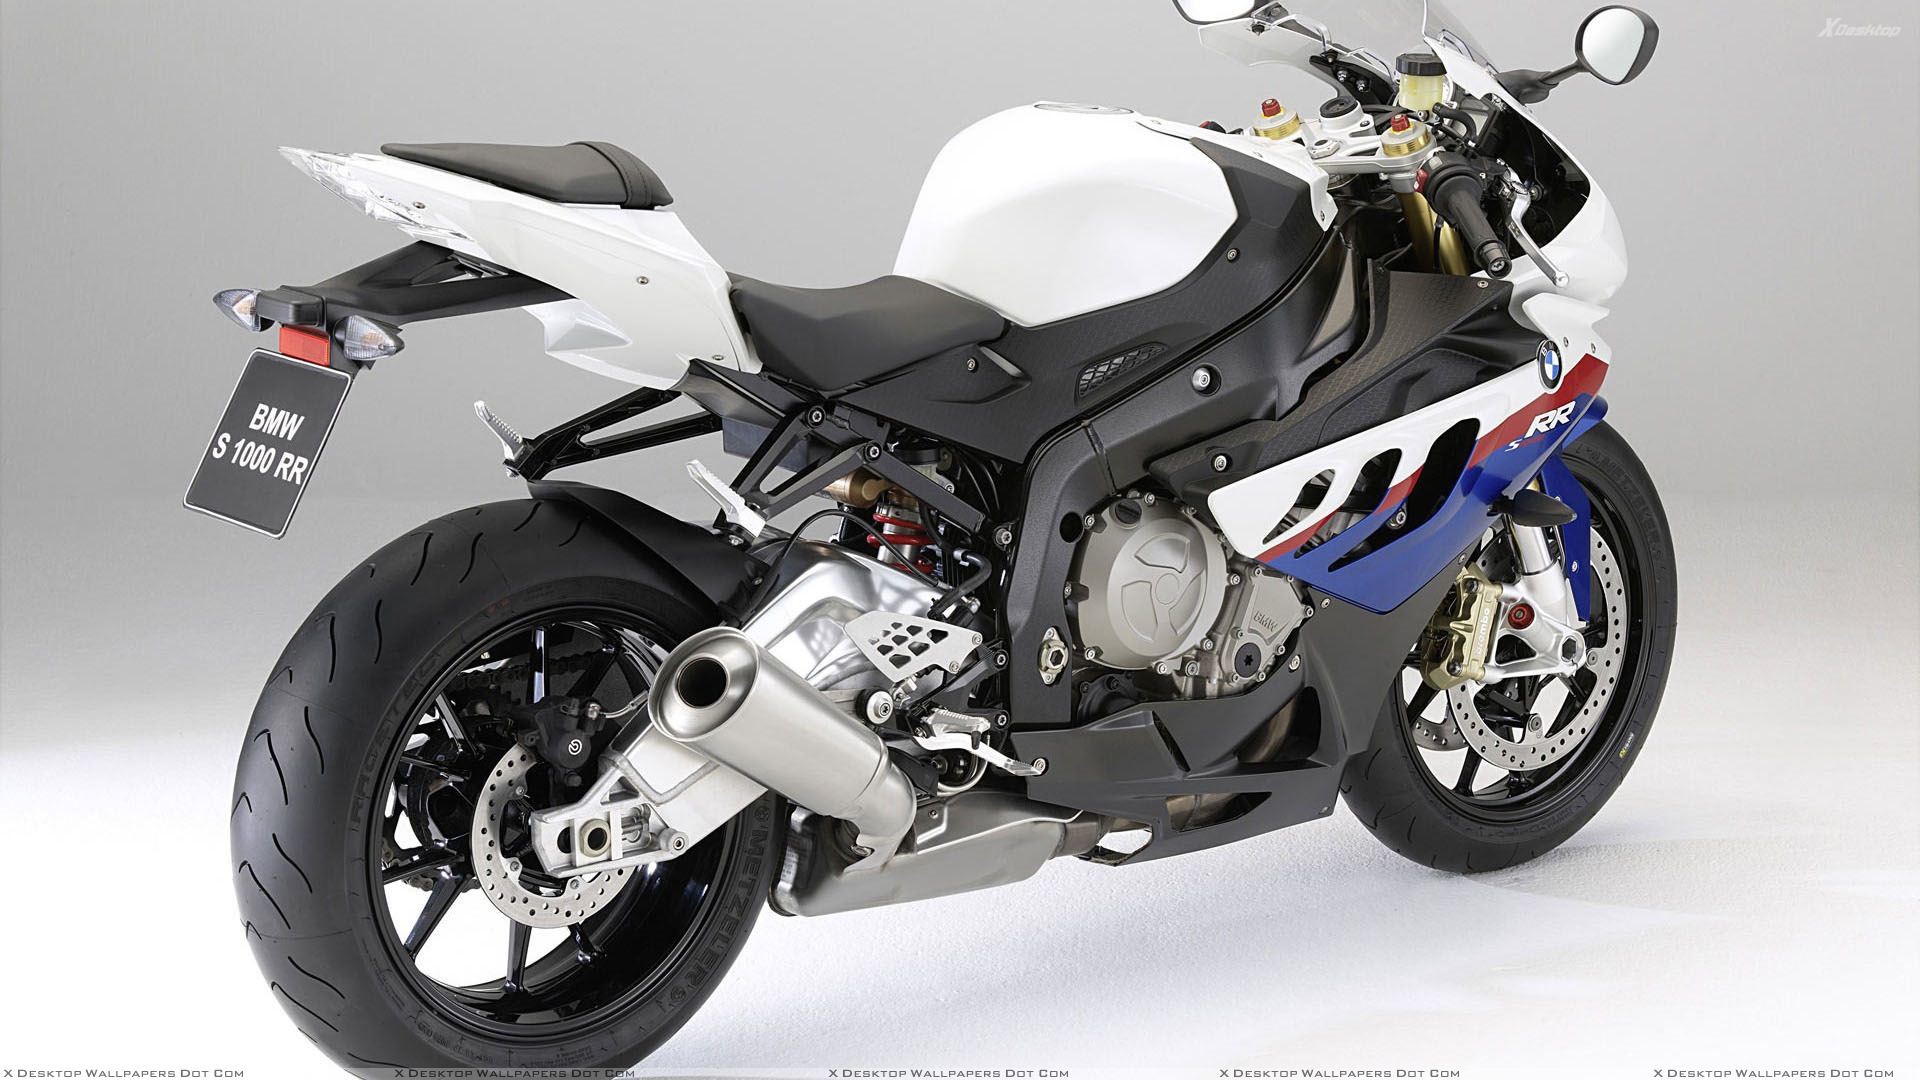 1920x1080 You are viewing wallpaper titled "BMW S1000RR ...